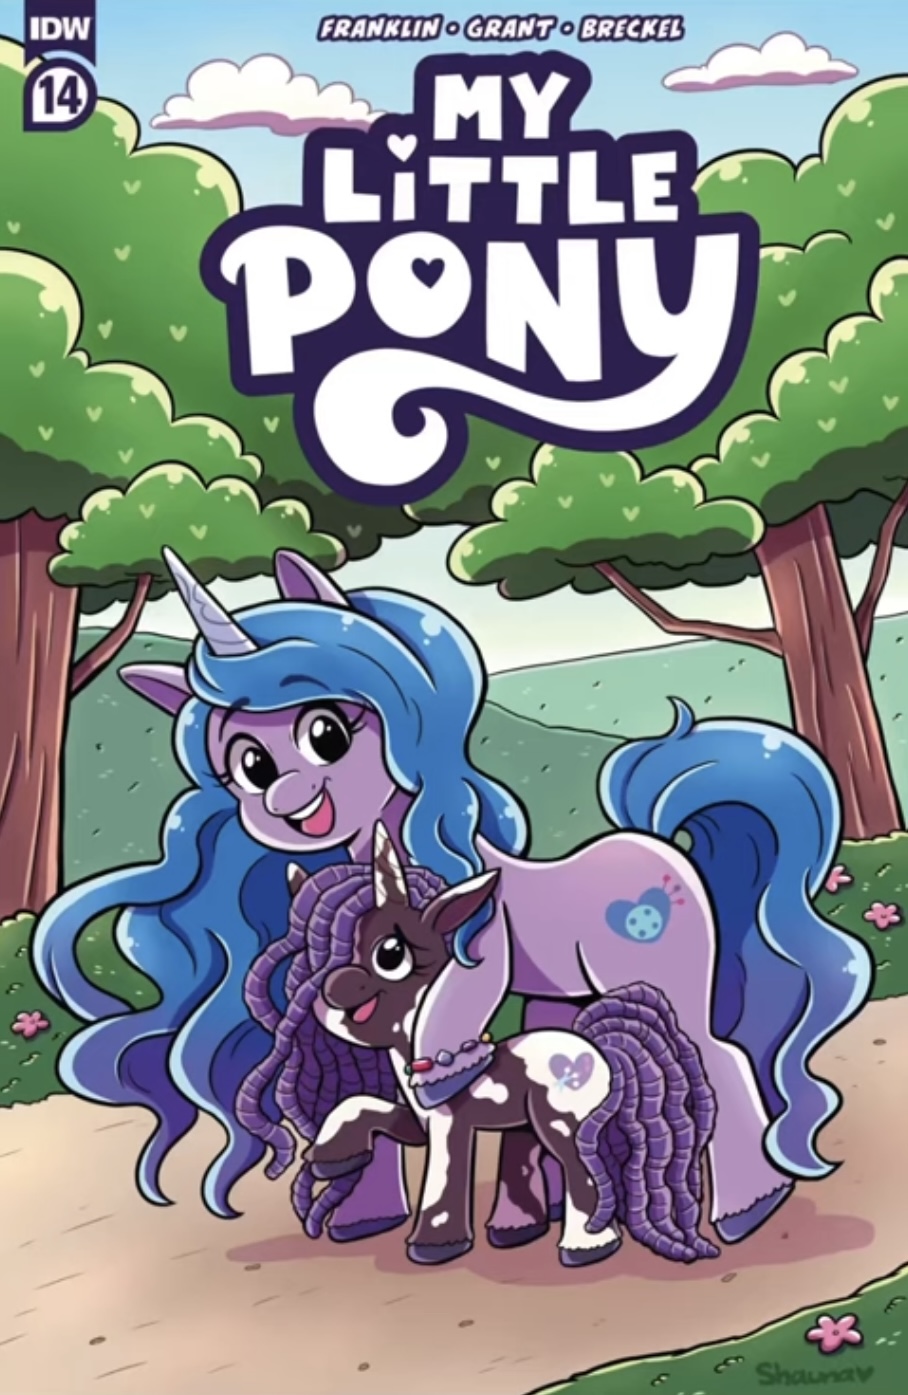 Read online My Little Pony comic -  Issue #14 - 1